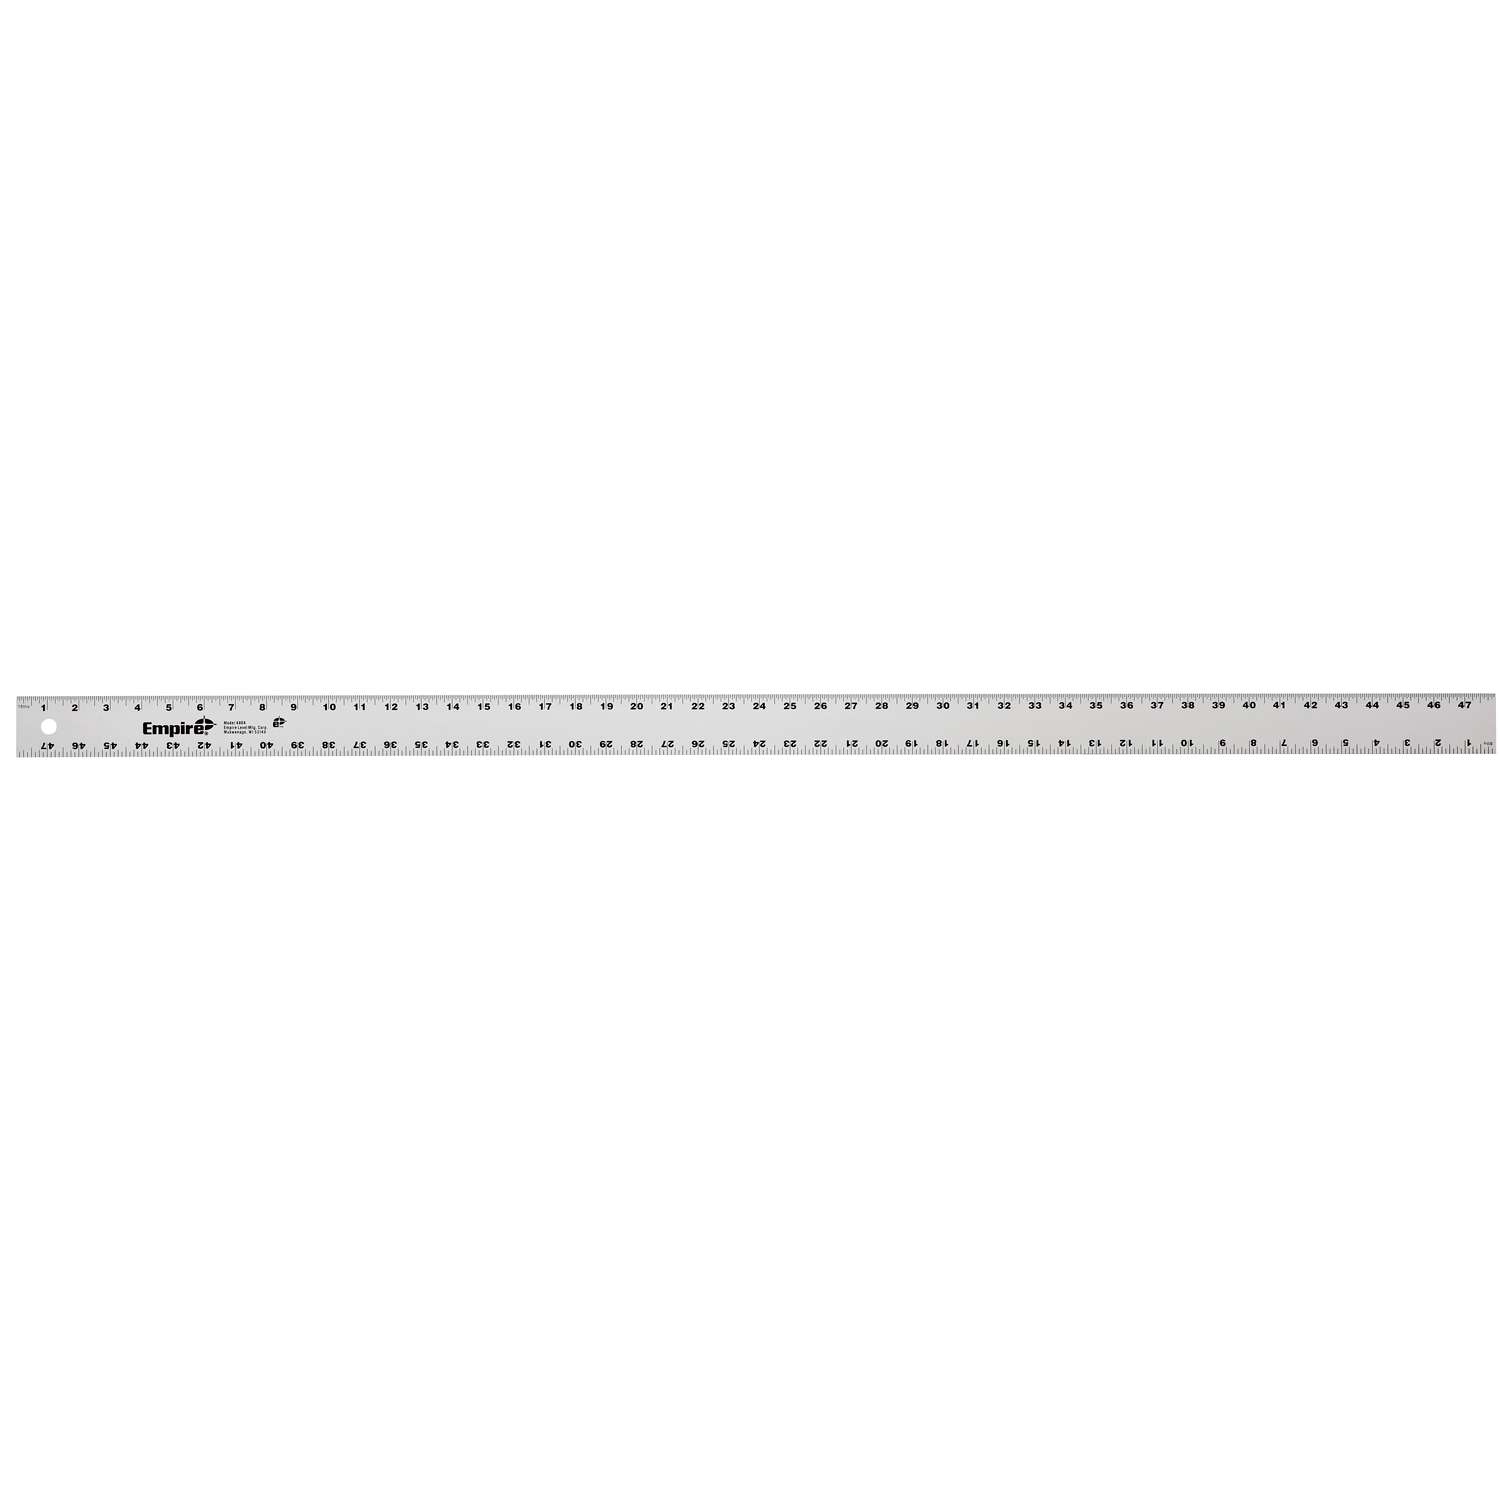 31 inch Aluminum Metal Big Foot Safety Ruler for Vinyl Cutting